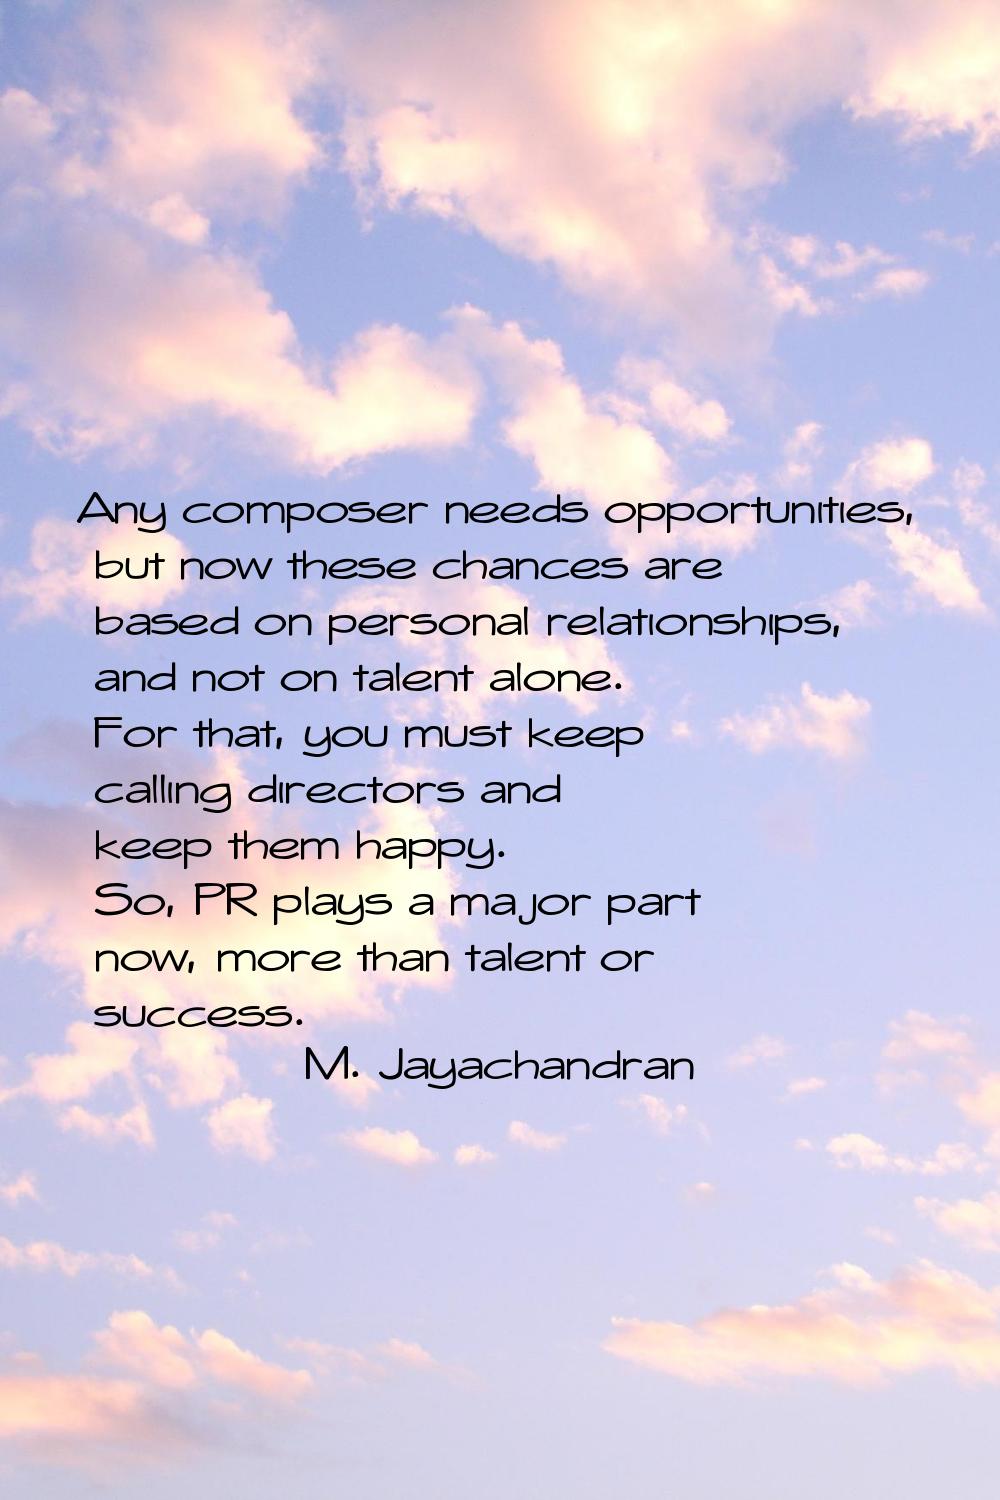 Any composer needs opportunities, but now these chances are based on personal relationships, and no